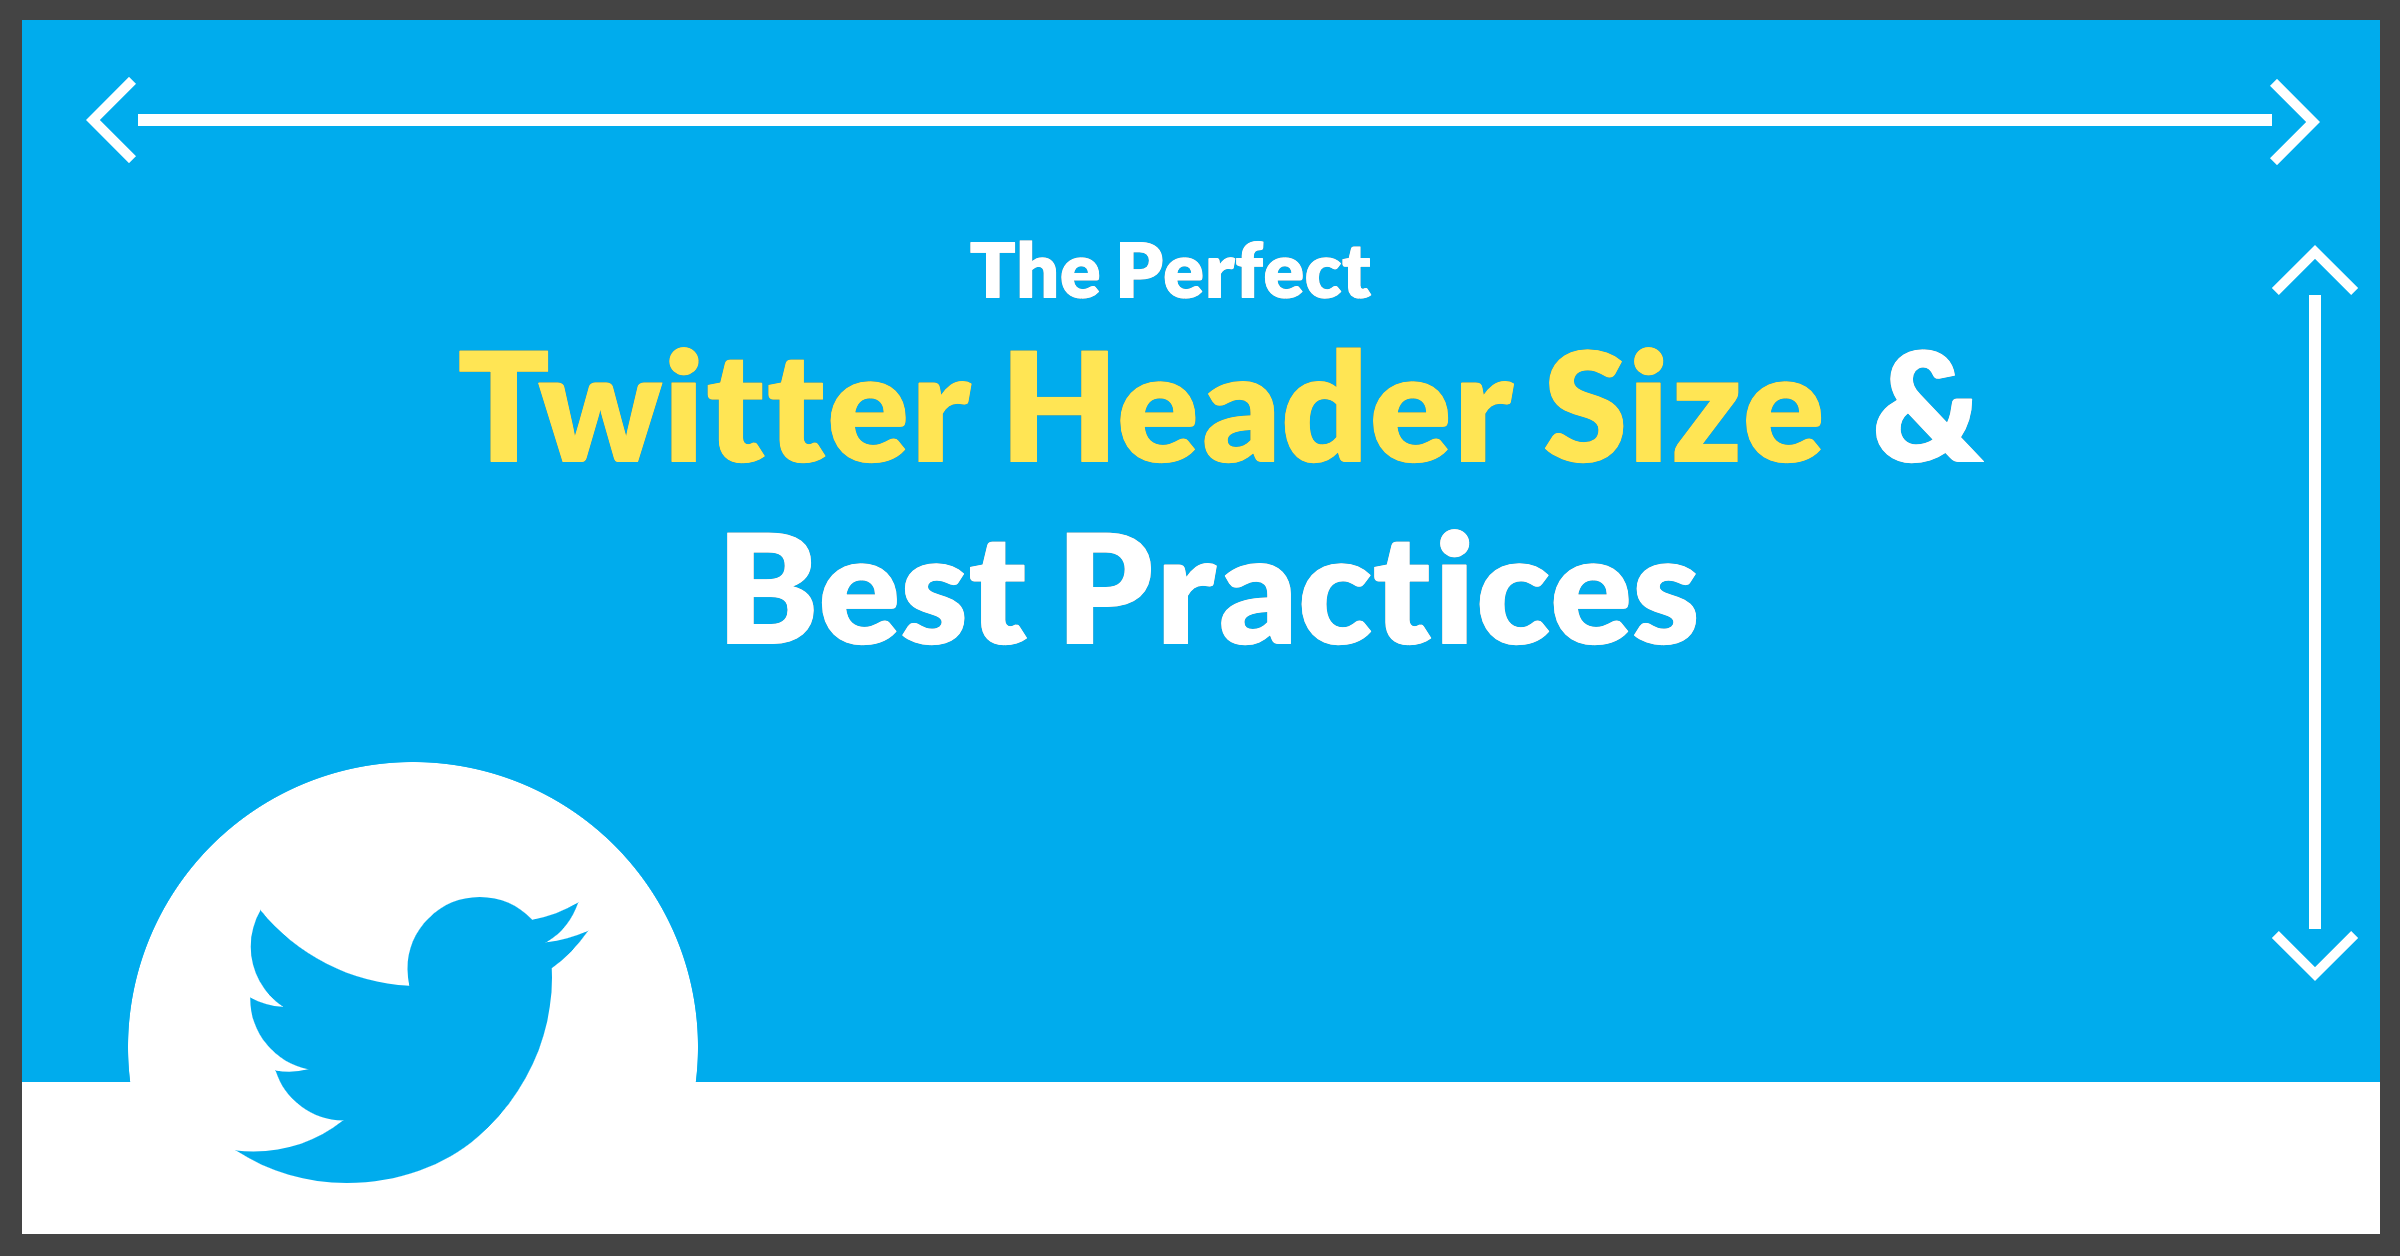 The Perfect Twitter Header Size & Best Practices (2020 Update)